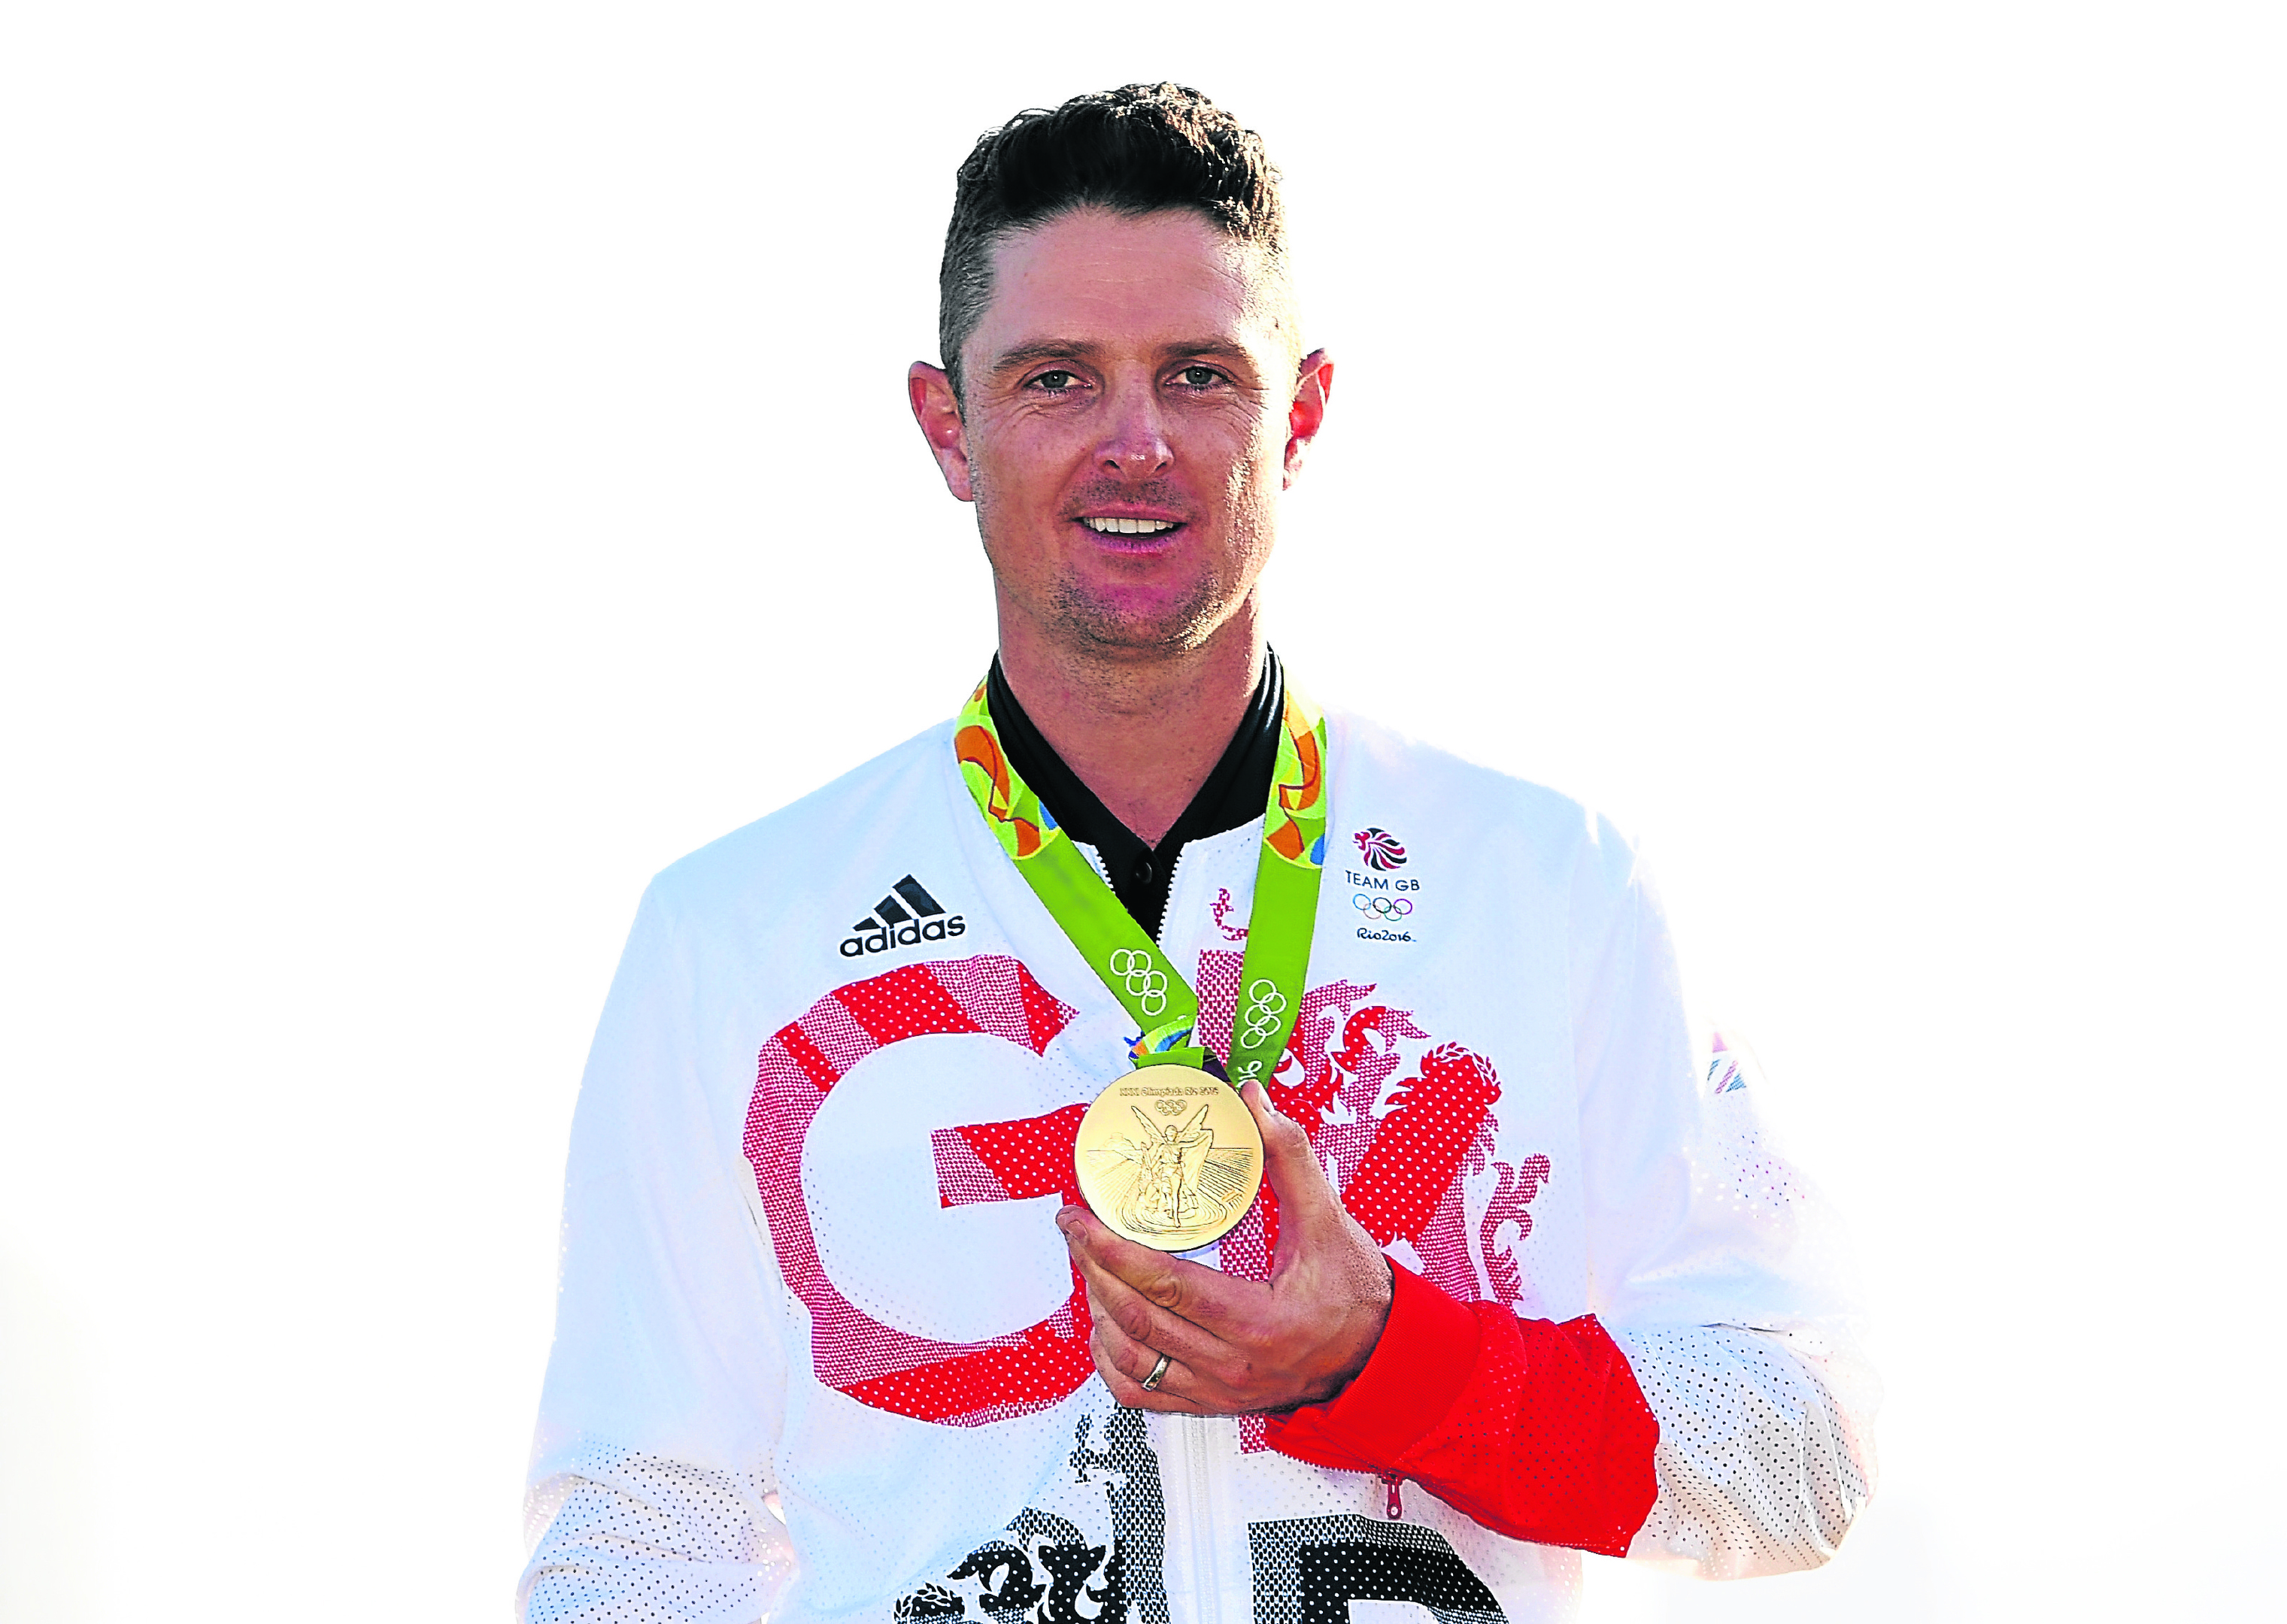 Justin Rose of Great Britain celebrates with the gold medal after winning in the final round of men's golf (Photo by Ross Kinnaird/Getty Images)